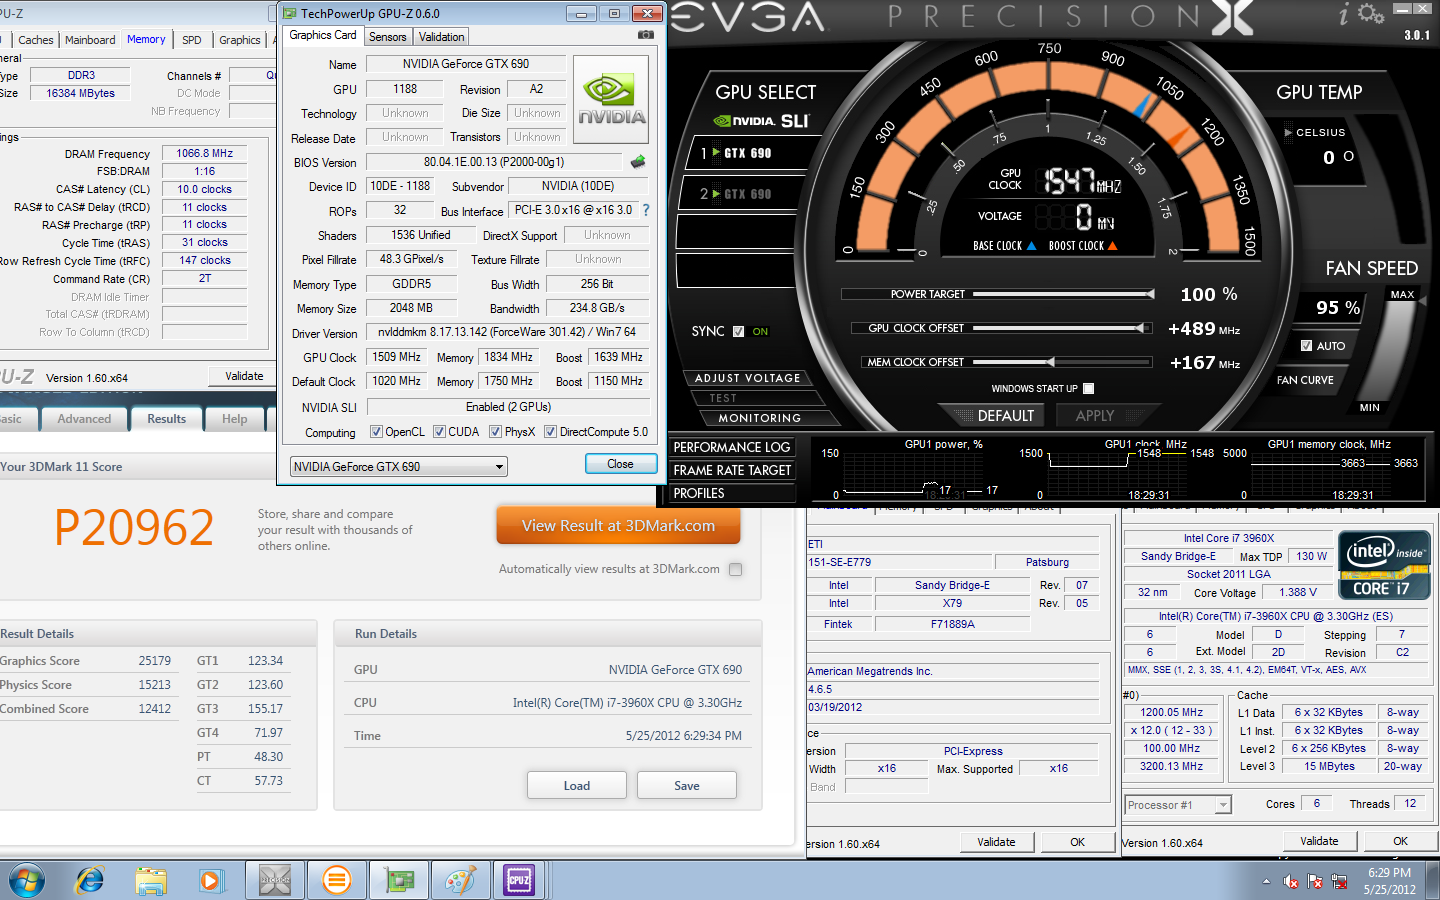 Media asset in full size related to 3dfxzone.it news item entitled as follows: Extreme Overclocking: record di una GTX 690 con 3DMark 11 | Image Name: news17327_3.png